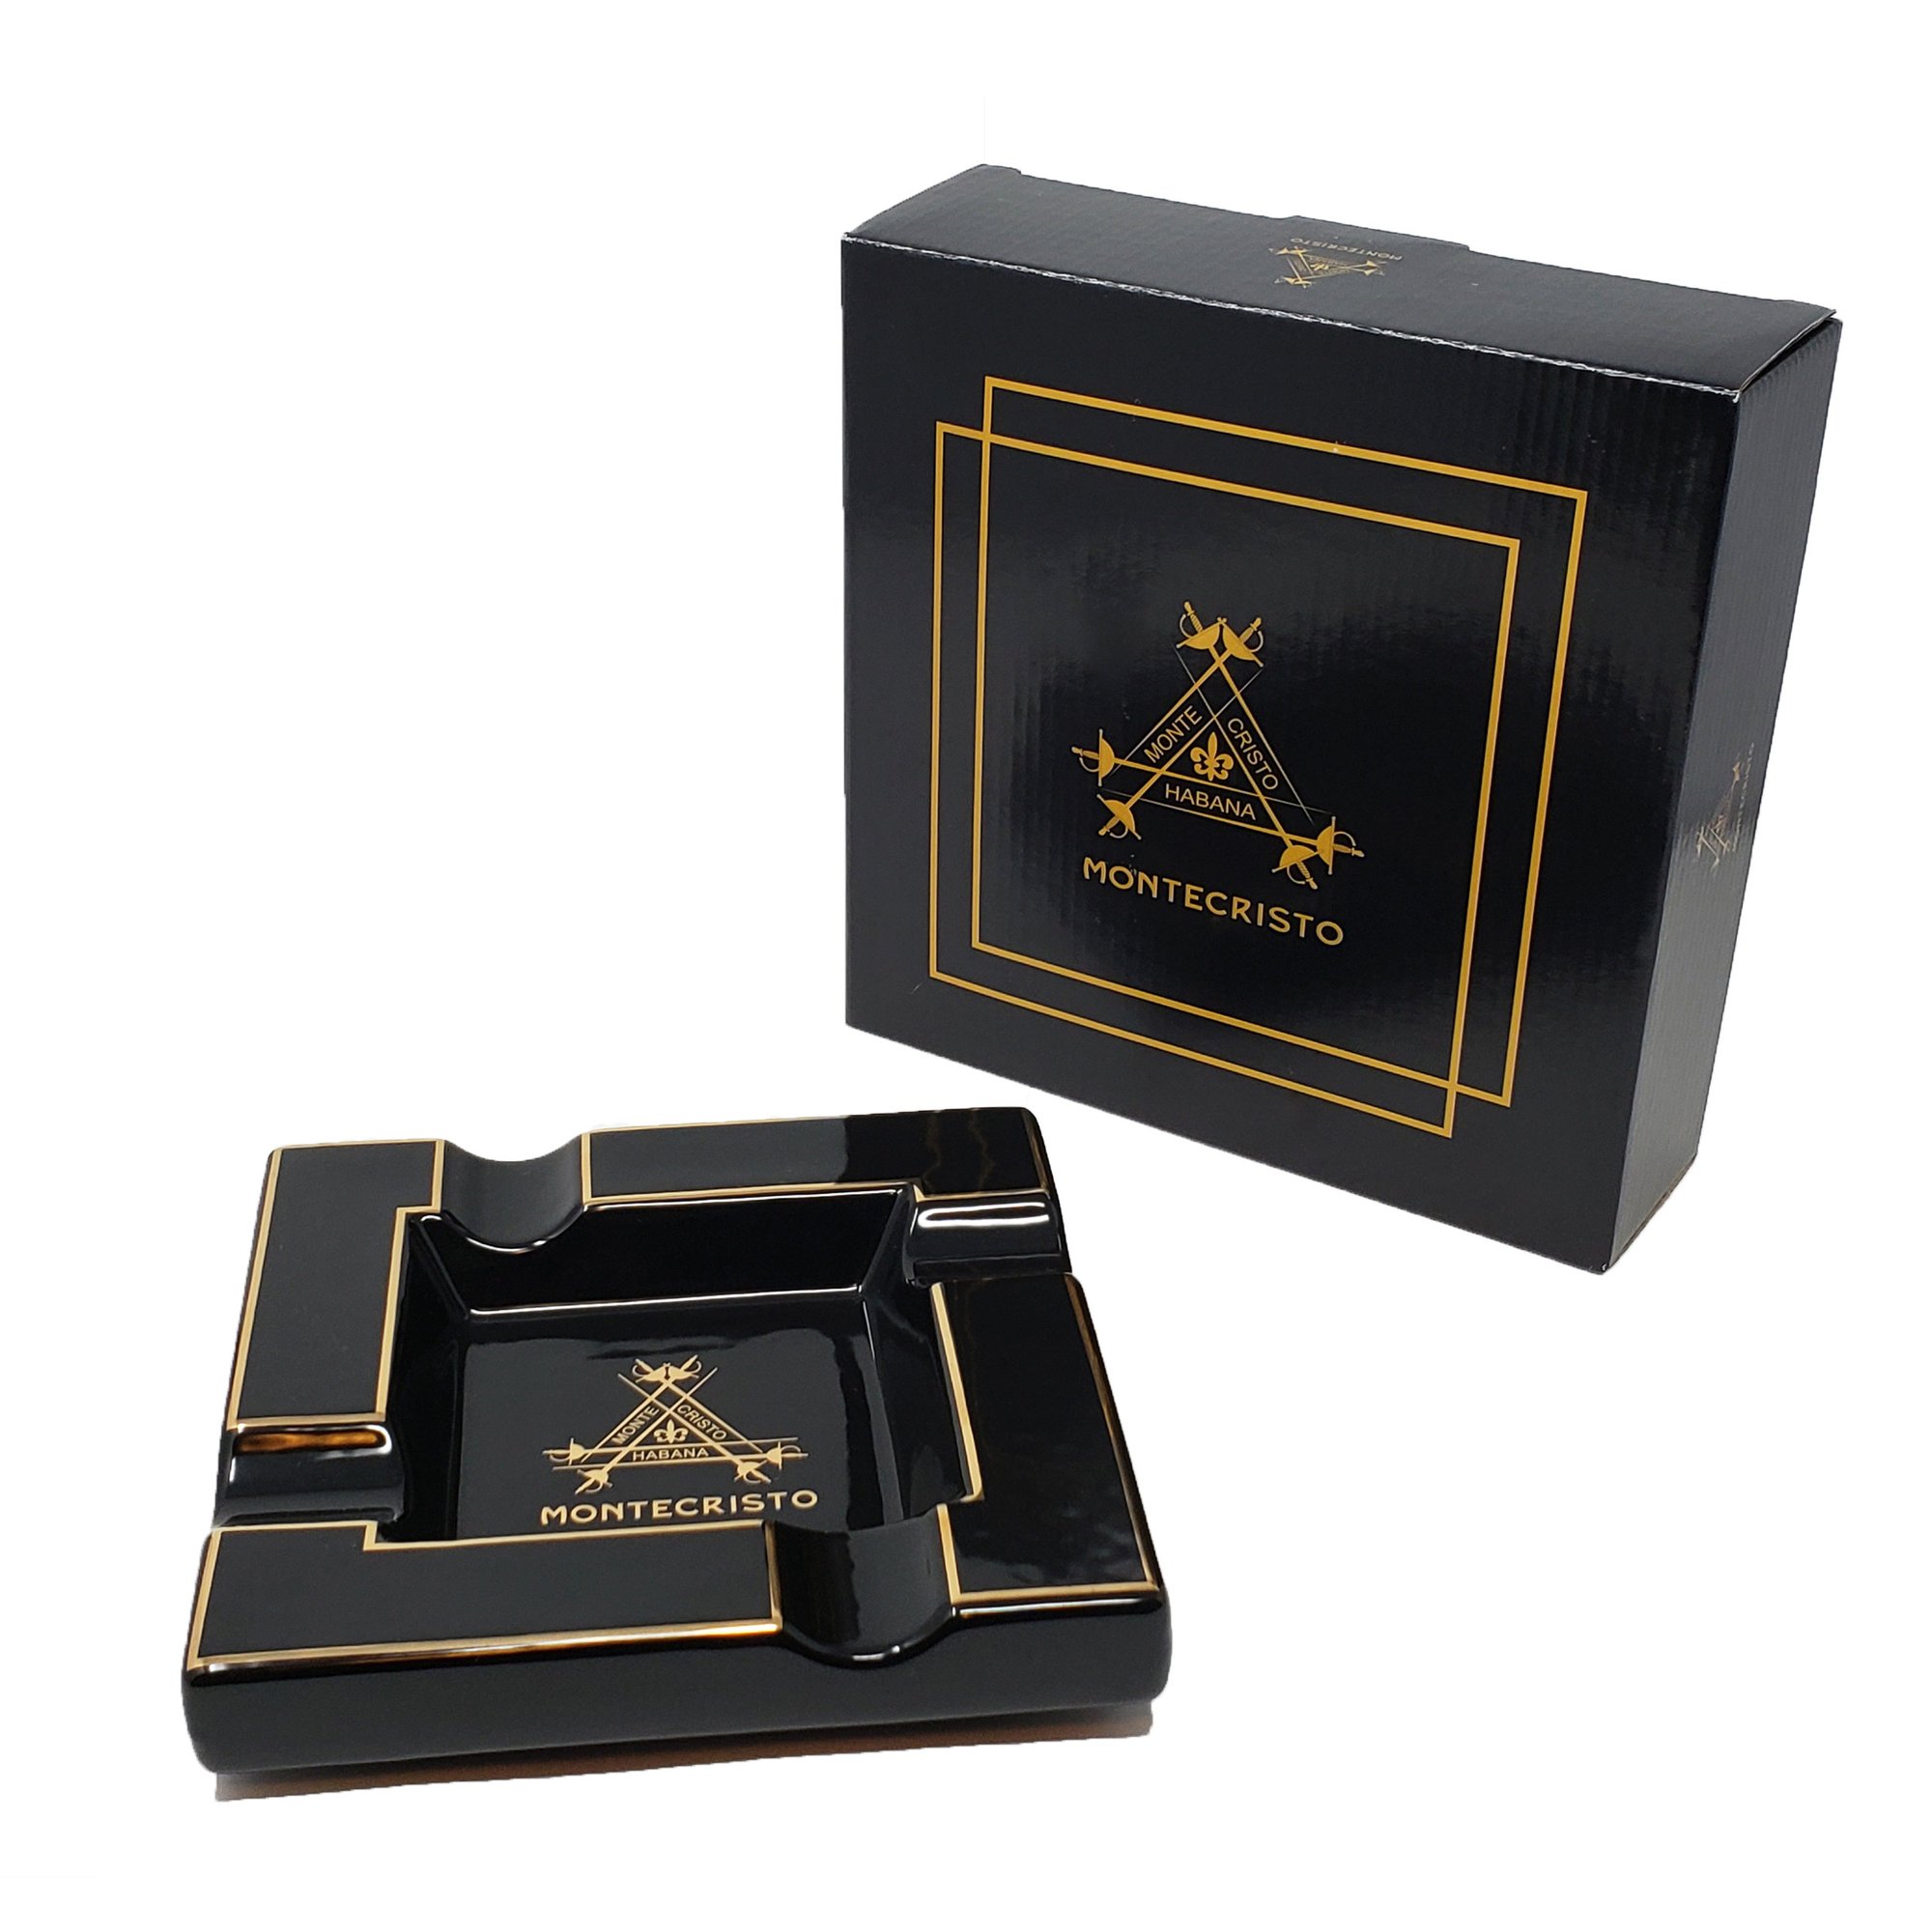 Montecristo Square Classic Cigar Ashtray - Black ⋆ Mail order authentic  Cuban Cigars online from Switzerland